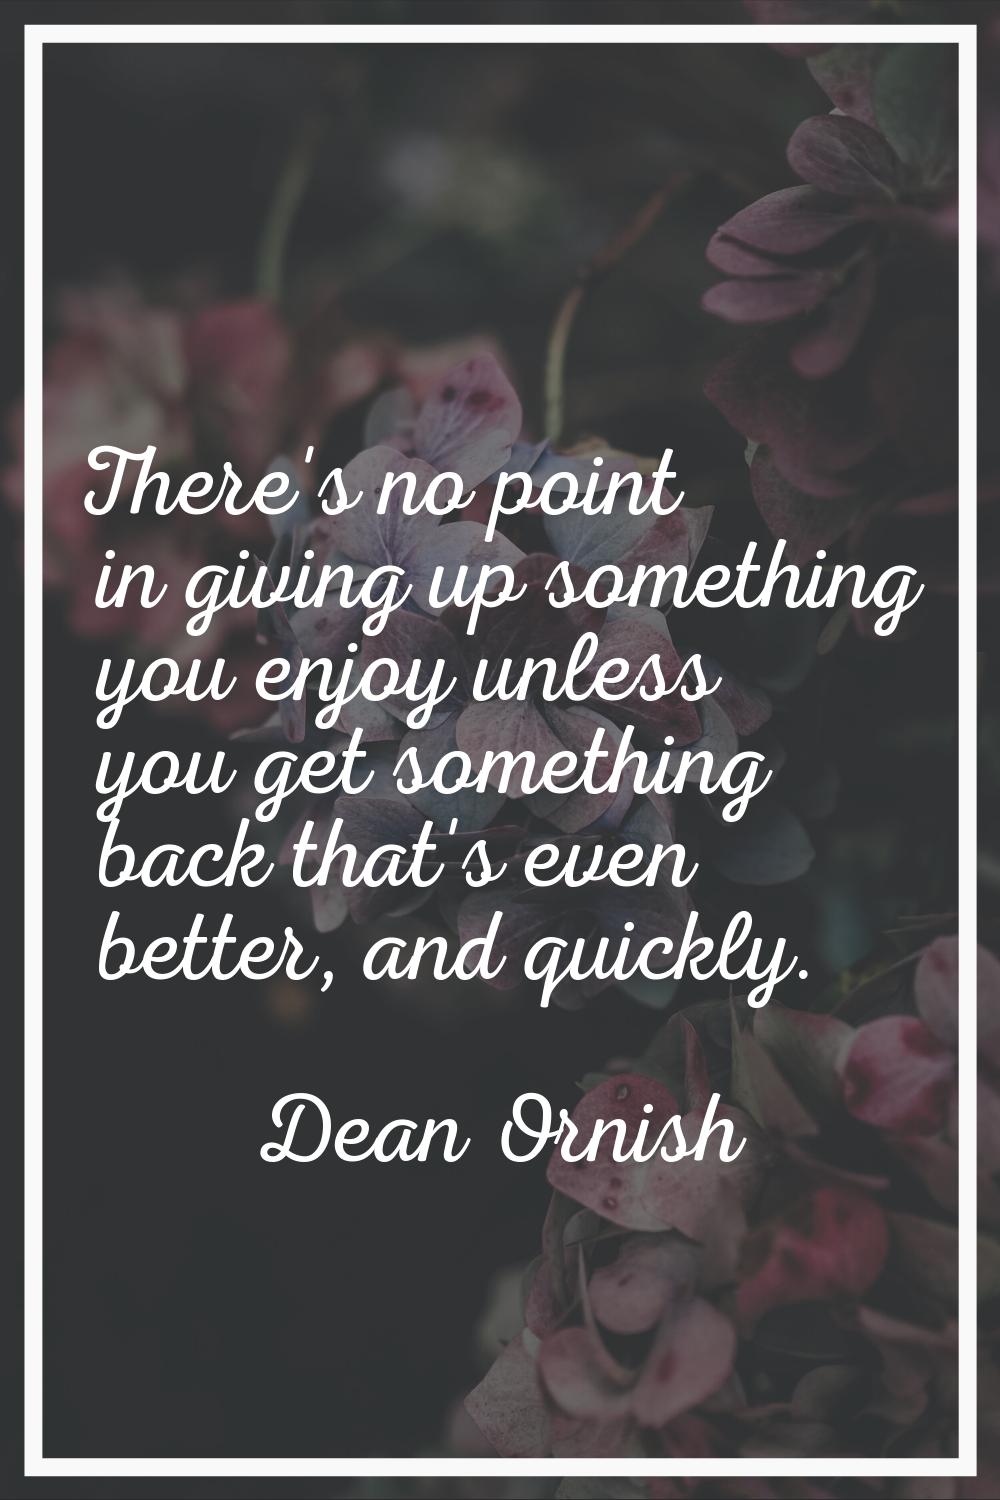 There's no point in giving up something you enjoy unless you get something back that's even better,